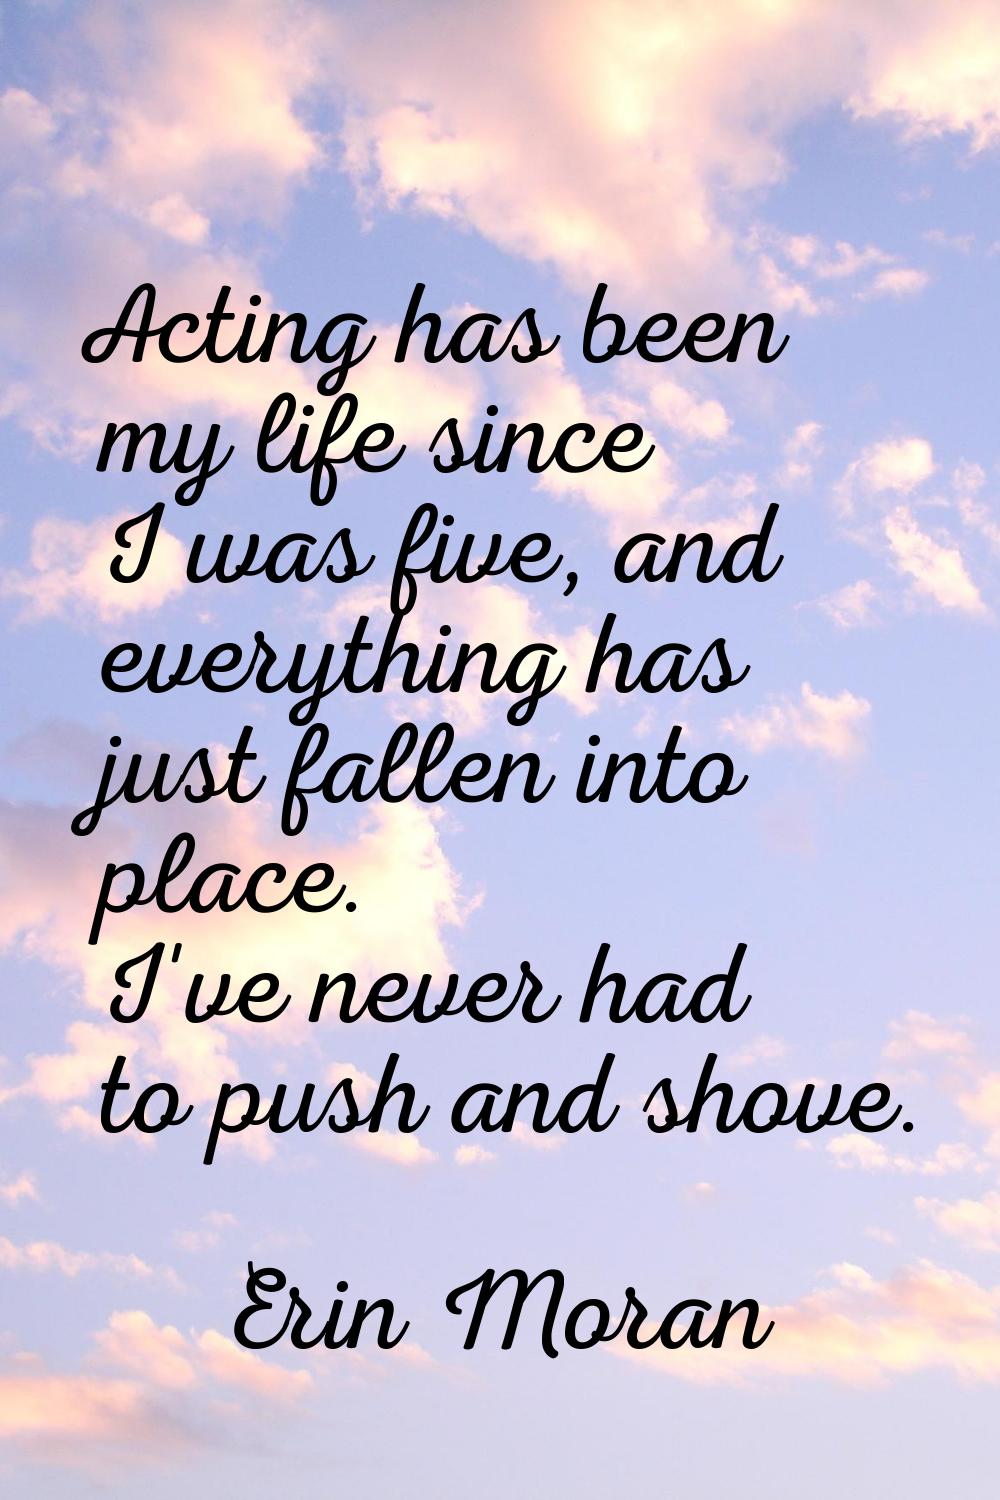 Acting has been my life since I was five, and everything has just fallen into place. I've never had